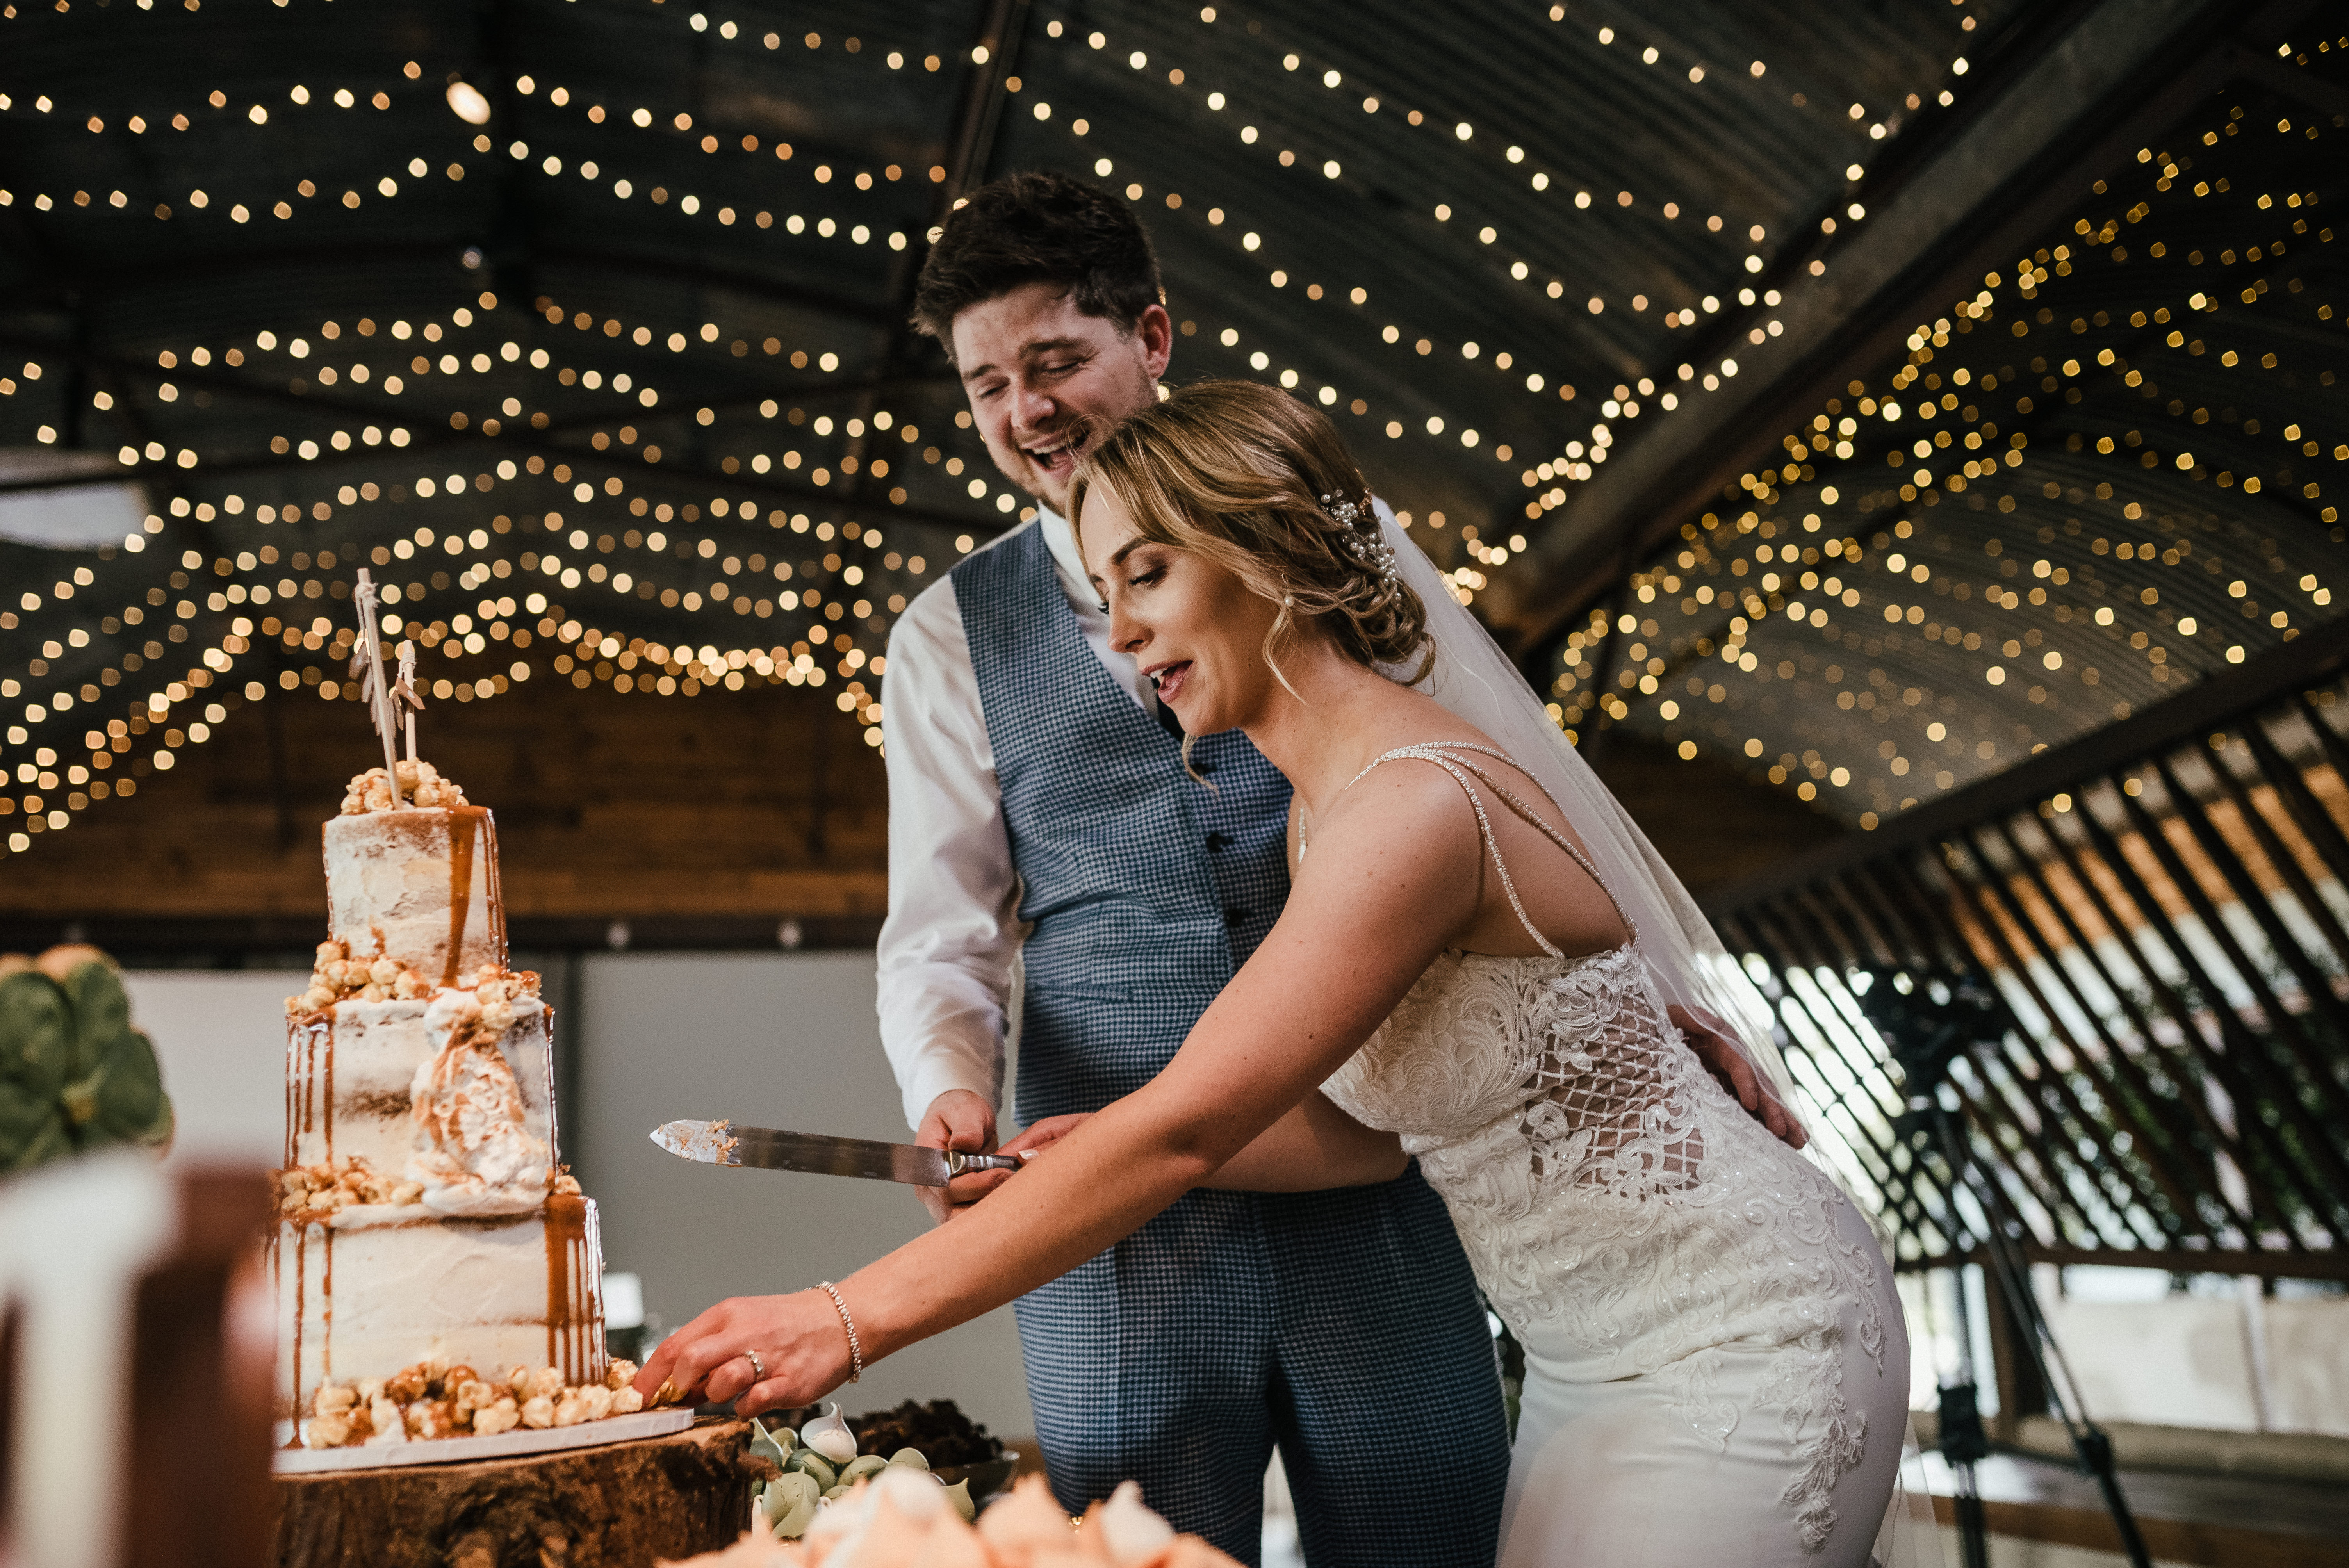 The Whitewed Directory from the professionals blog lets talk cake wedding suppliers cakemakers Cakes by Mrs F Hannah Culley's Cakes Kimmi's Cakes cutting the cake twinkling lights ceiling drapes